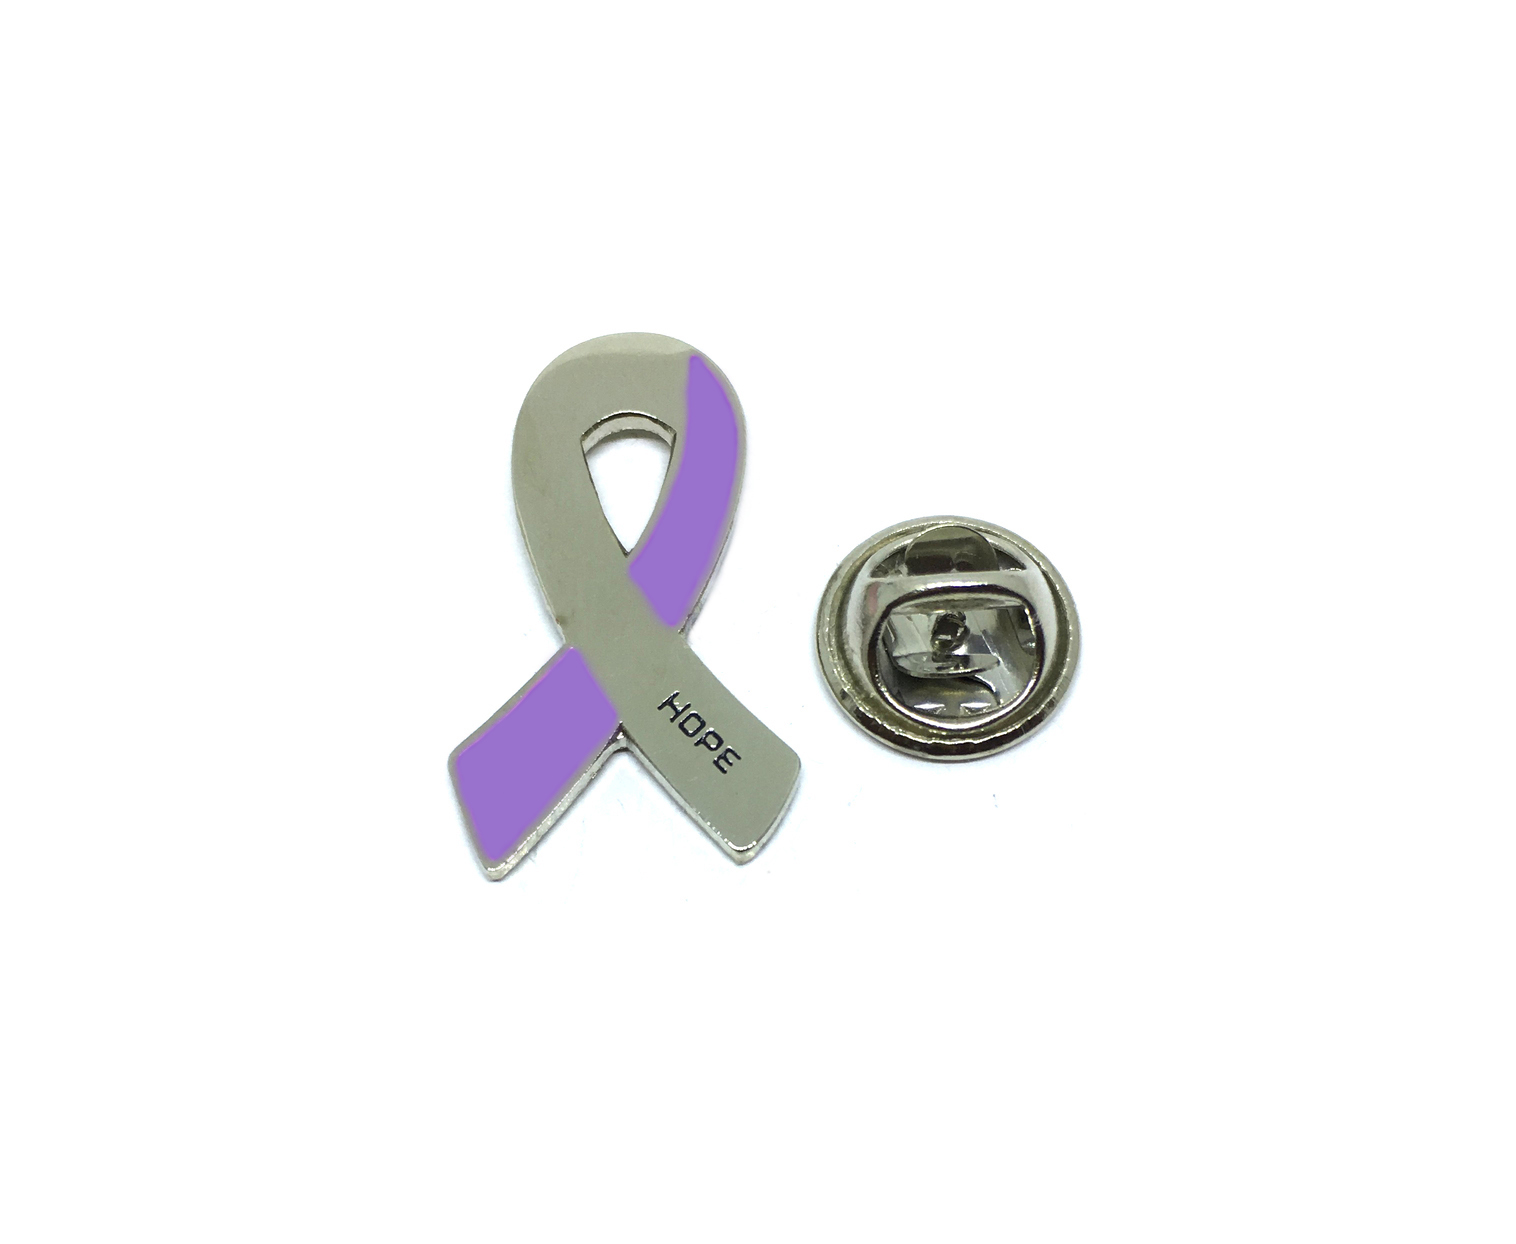 Cancer Hope Pin